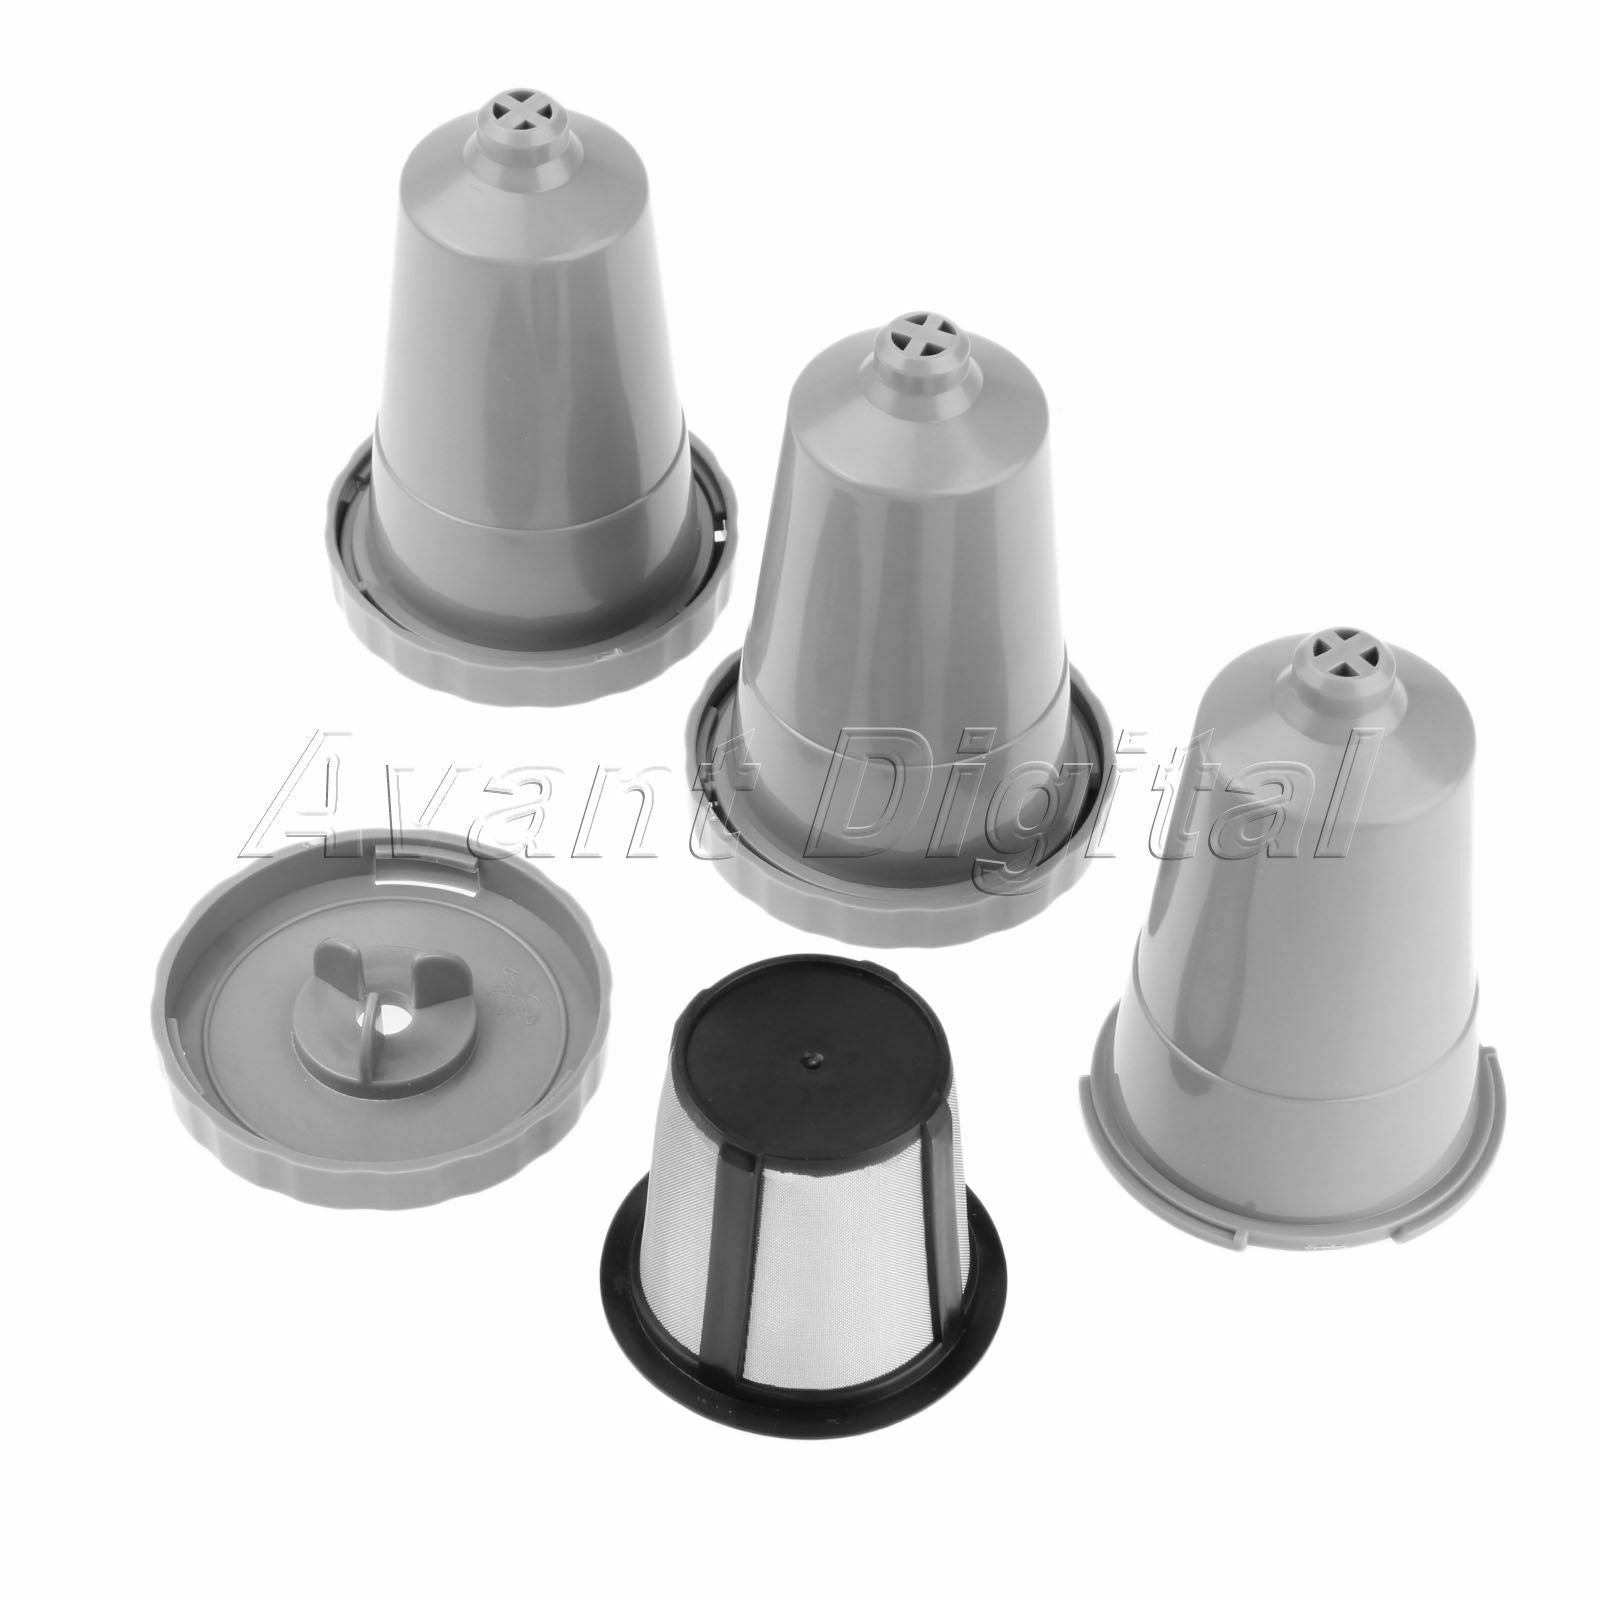 For My K-Cup Keurig Coffee Filter - Brand Replacement Parts Set 3pcs i Cafilas